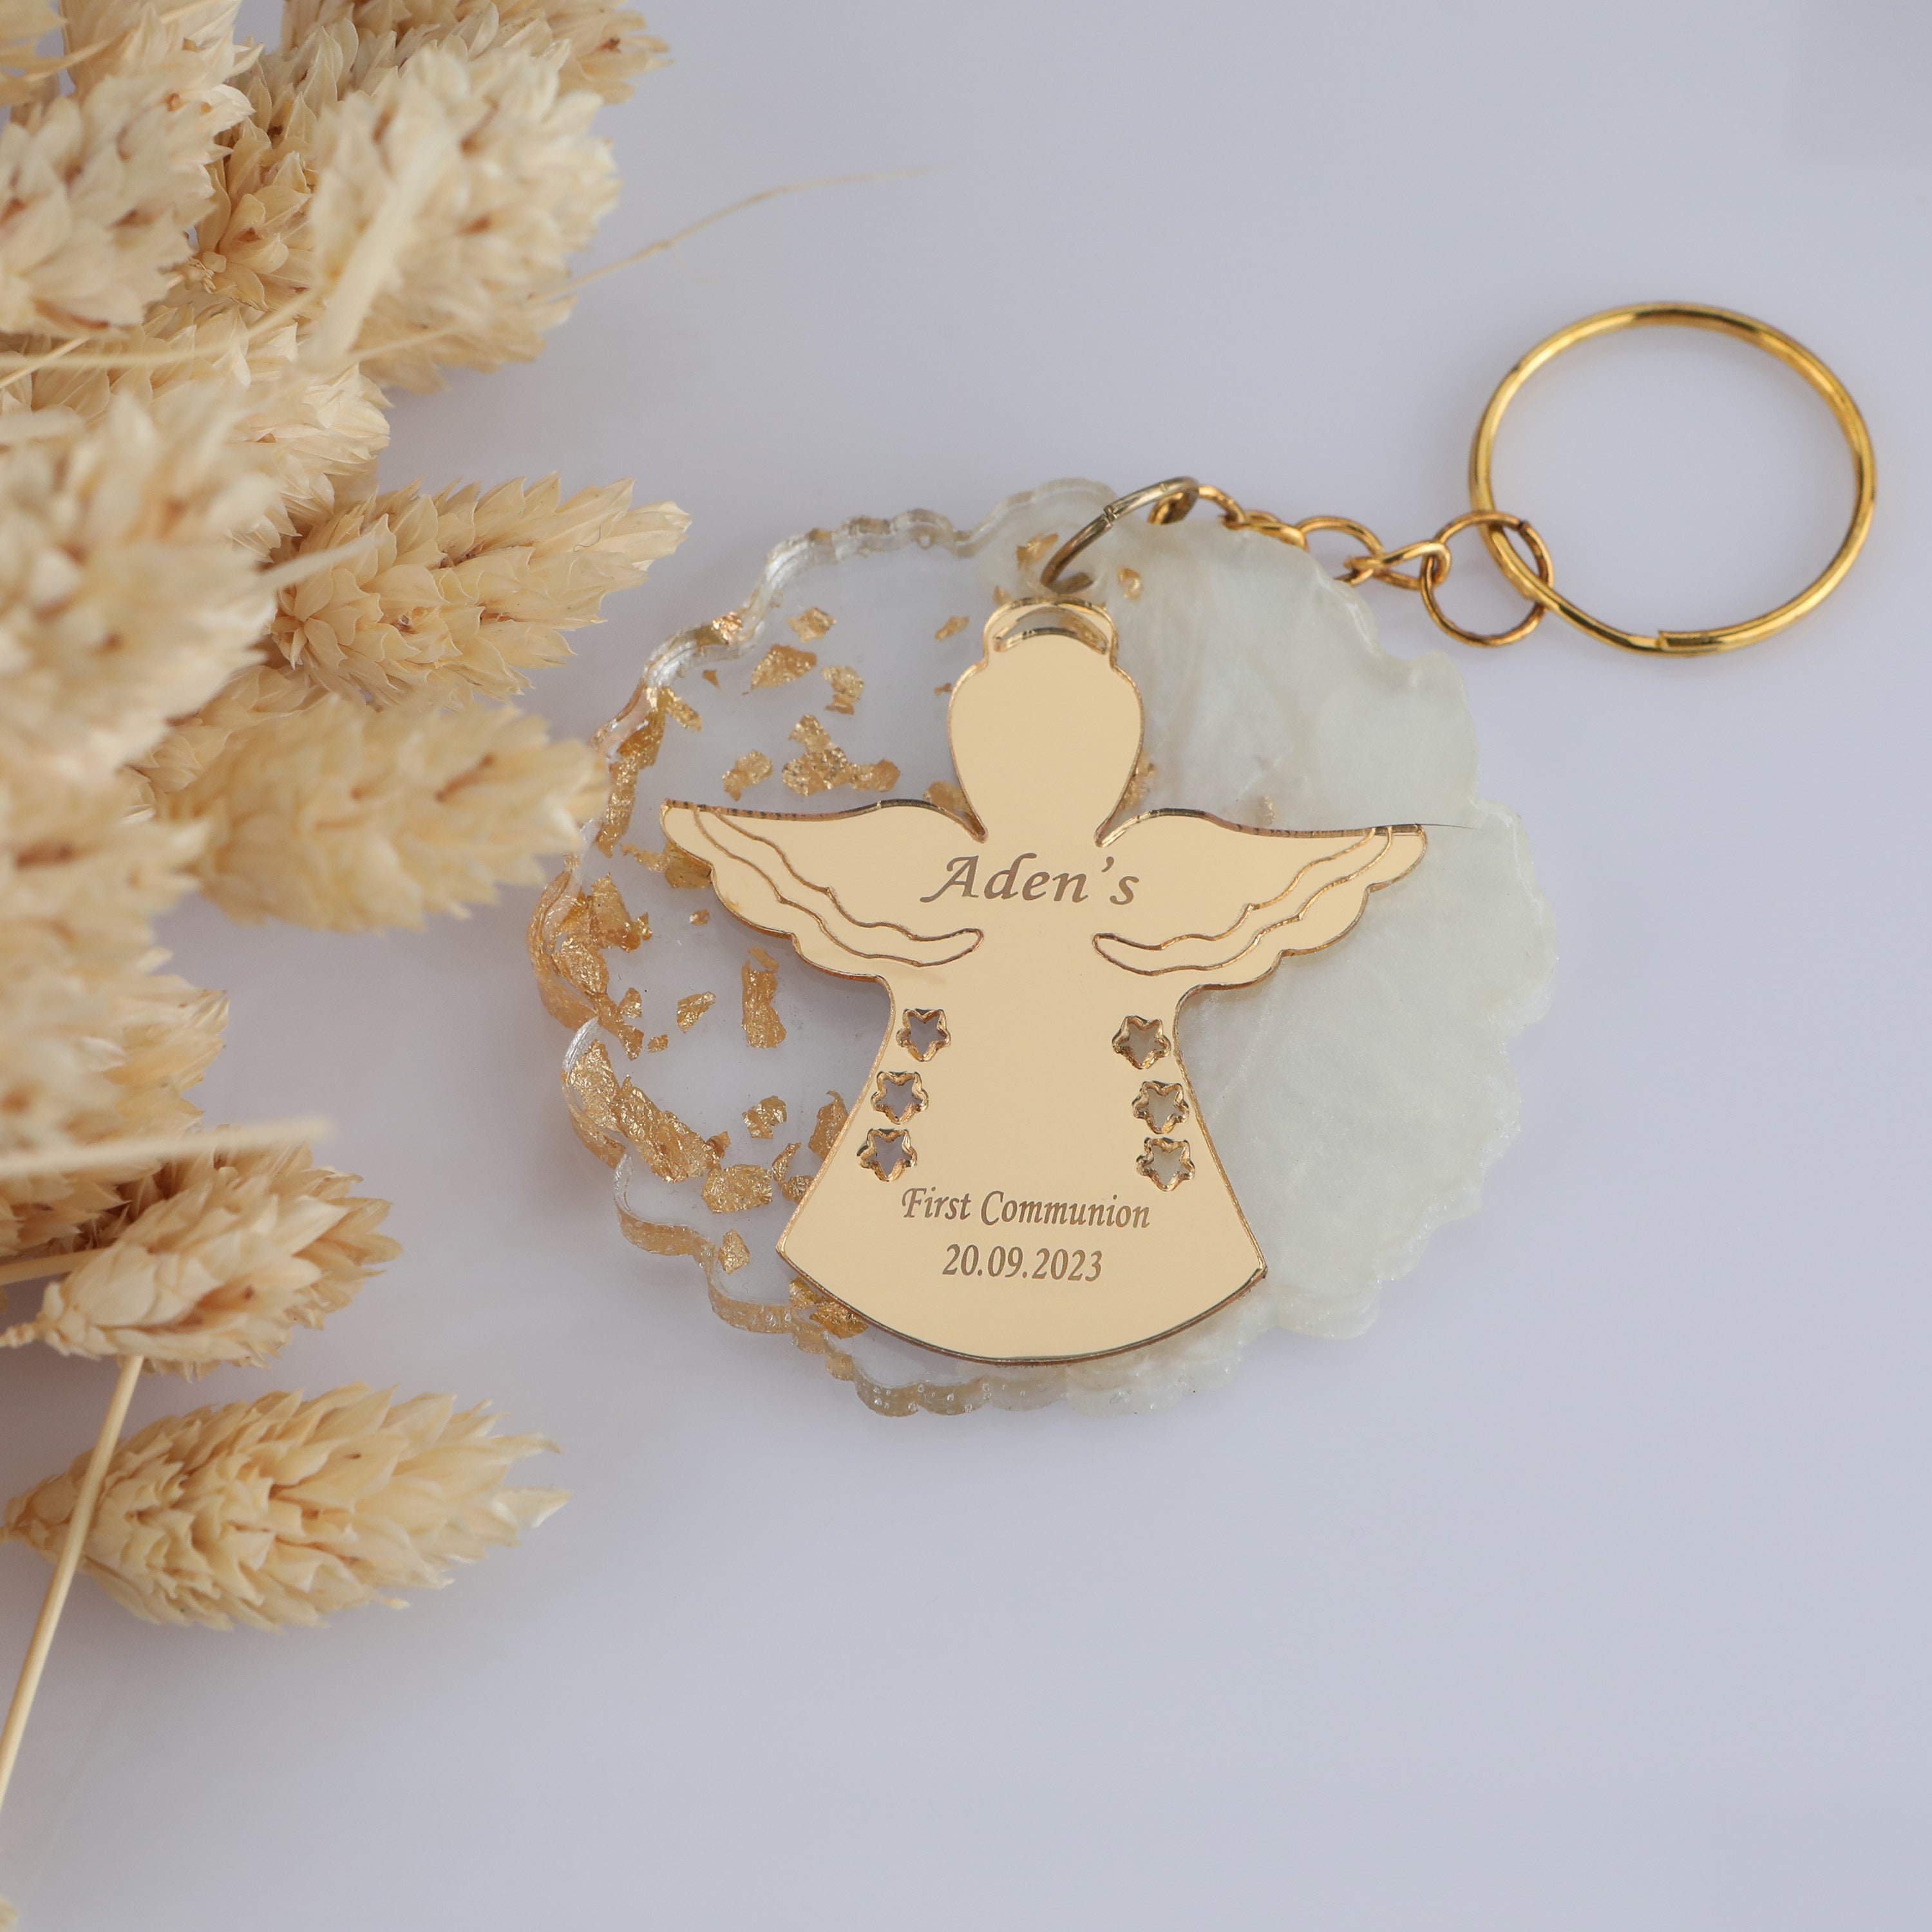 Gadpiparty 16 Pcs Angel Keychain Angel Charms Angel Dangle Charms for  Keychains Key Chain Charms Lucky Keychain Baby Baptism Favors Baby Shower  Favors